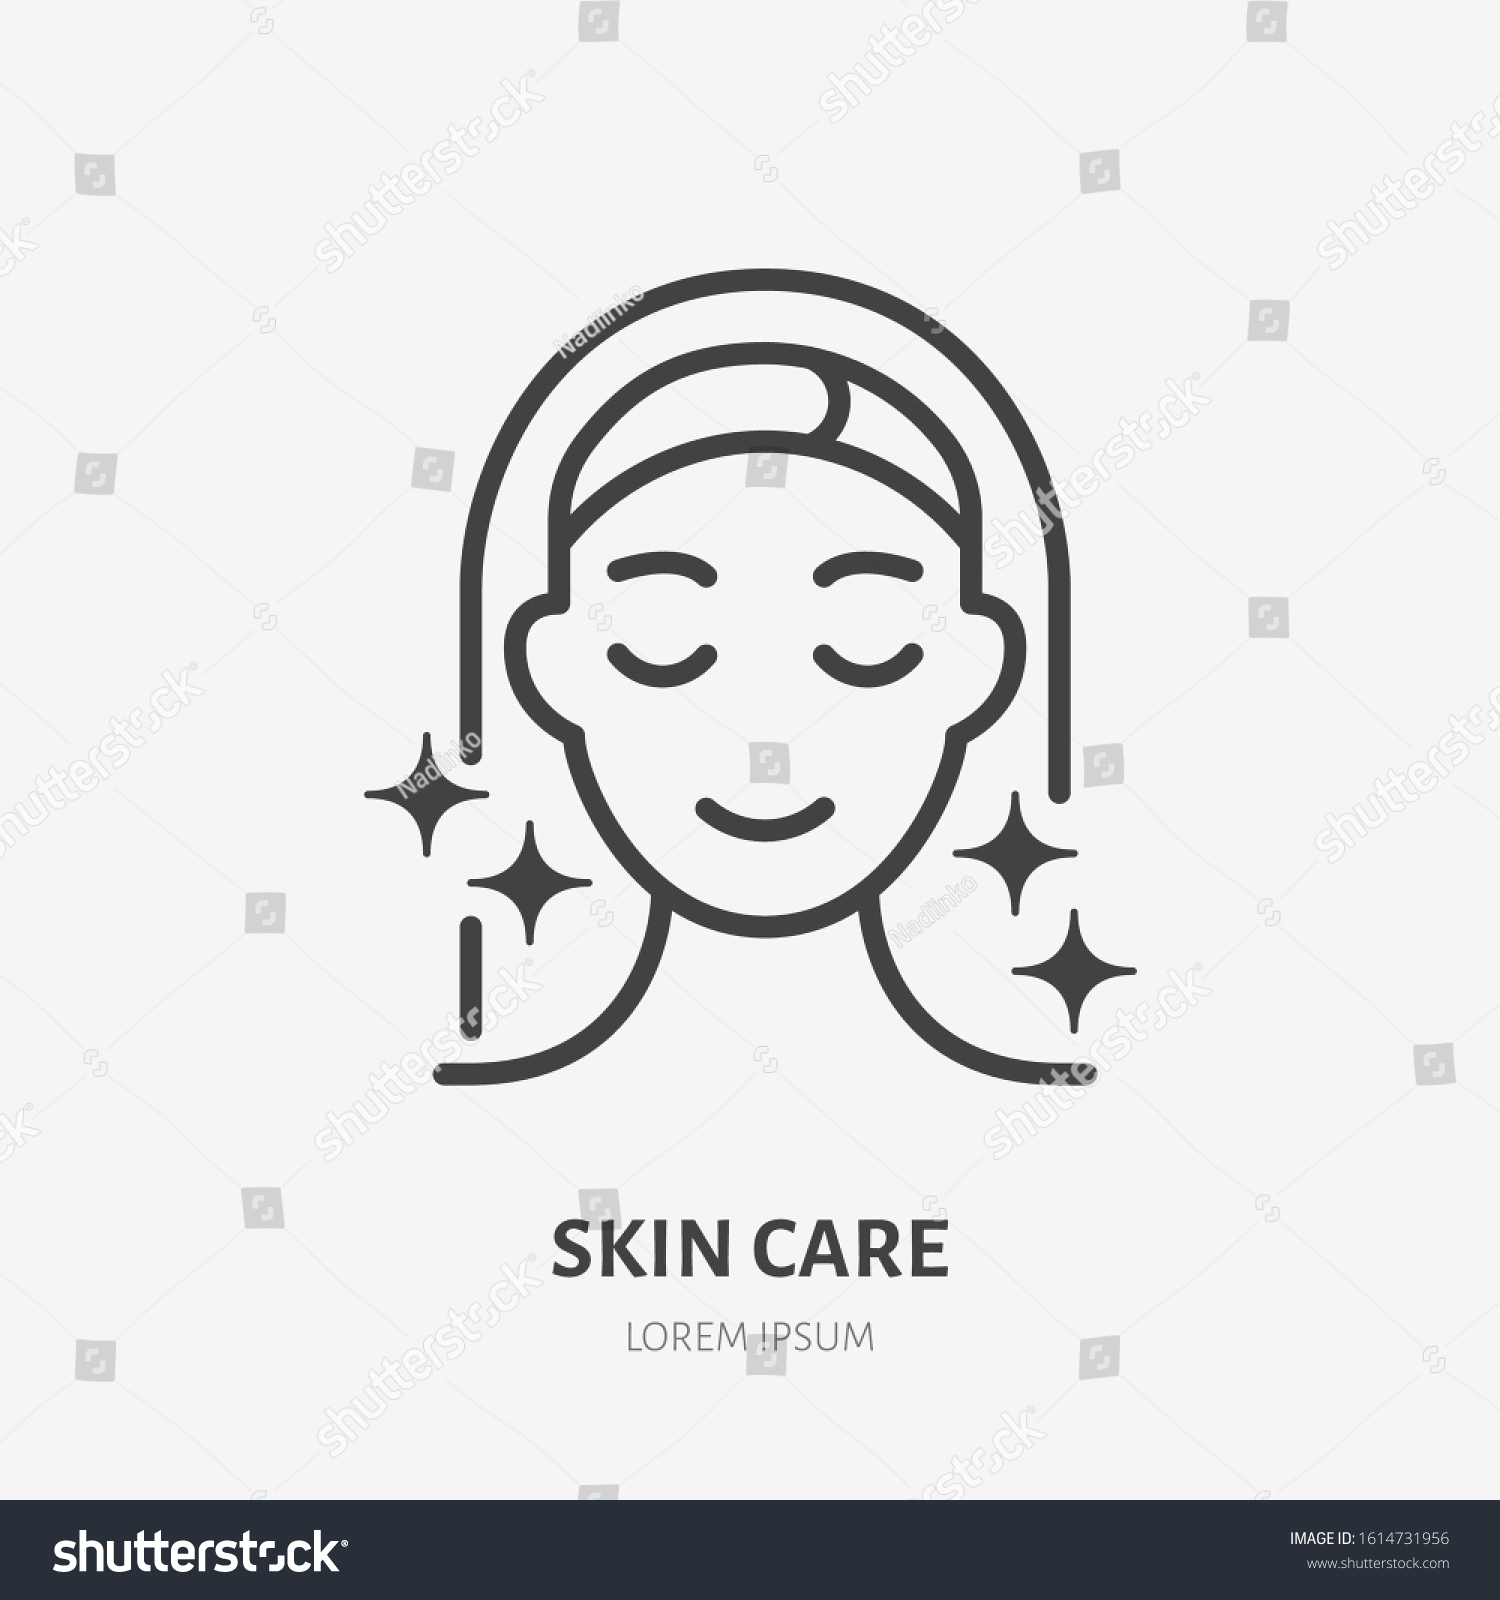 Aesthetic cosmetology line icon, vector pictogram of shiny skin, anti age skin care. Hapy woman illustration, sign for plastic surgery clinic. #1614731956